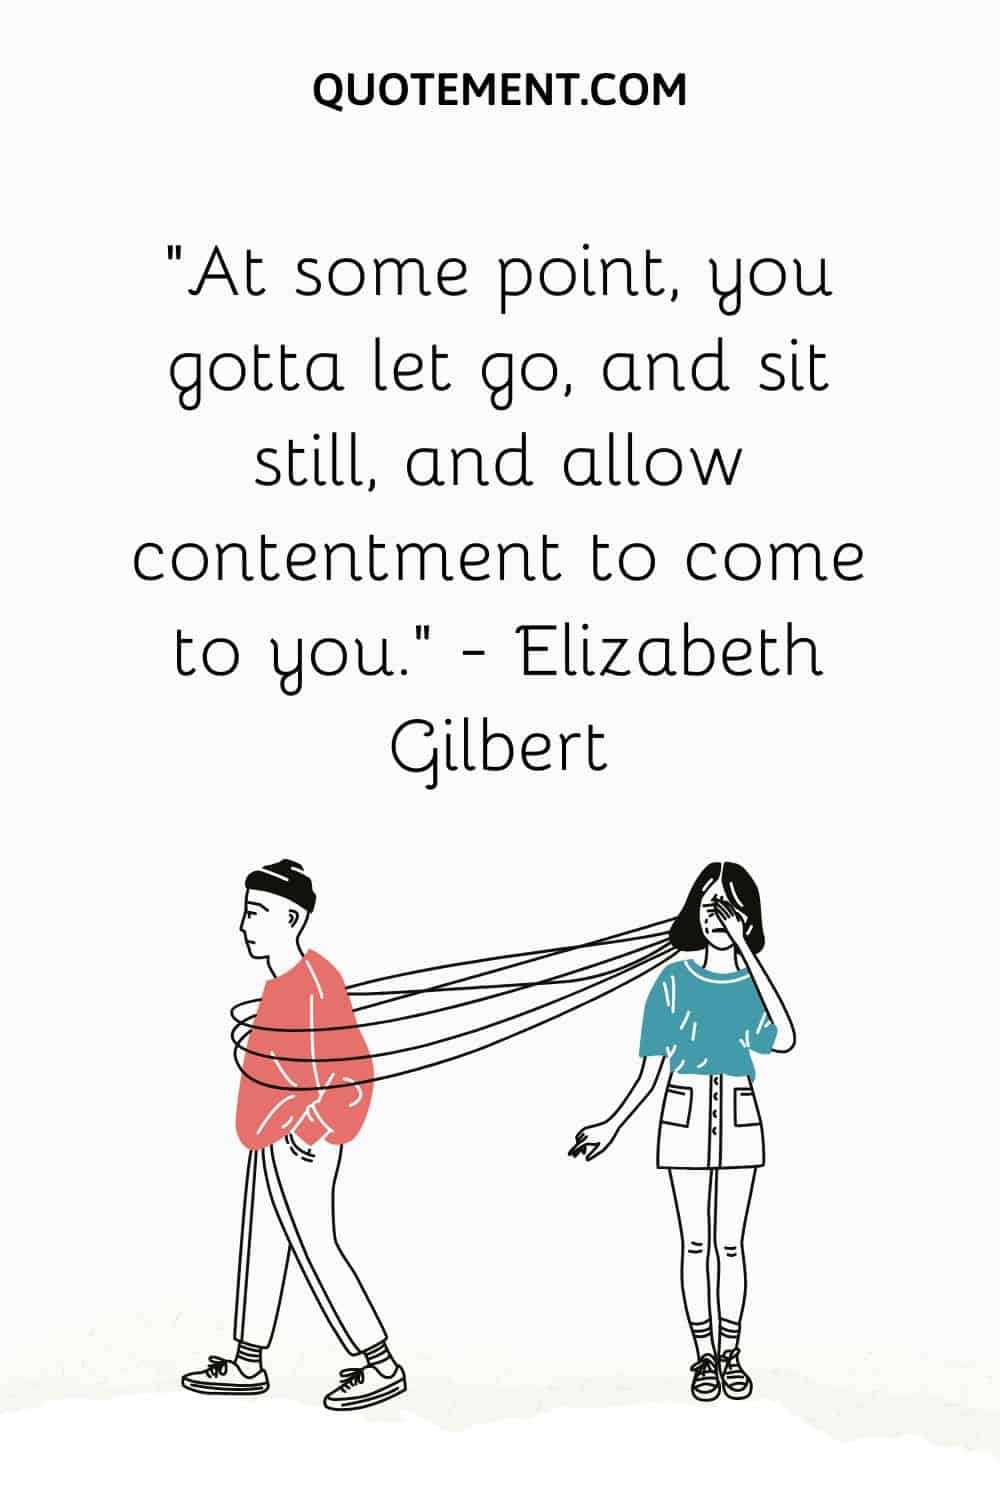 At some point, you gotta let go, and sit still, and allow contentment to come to you